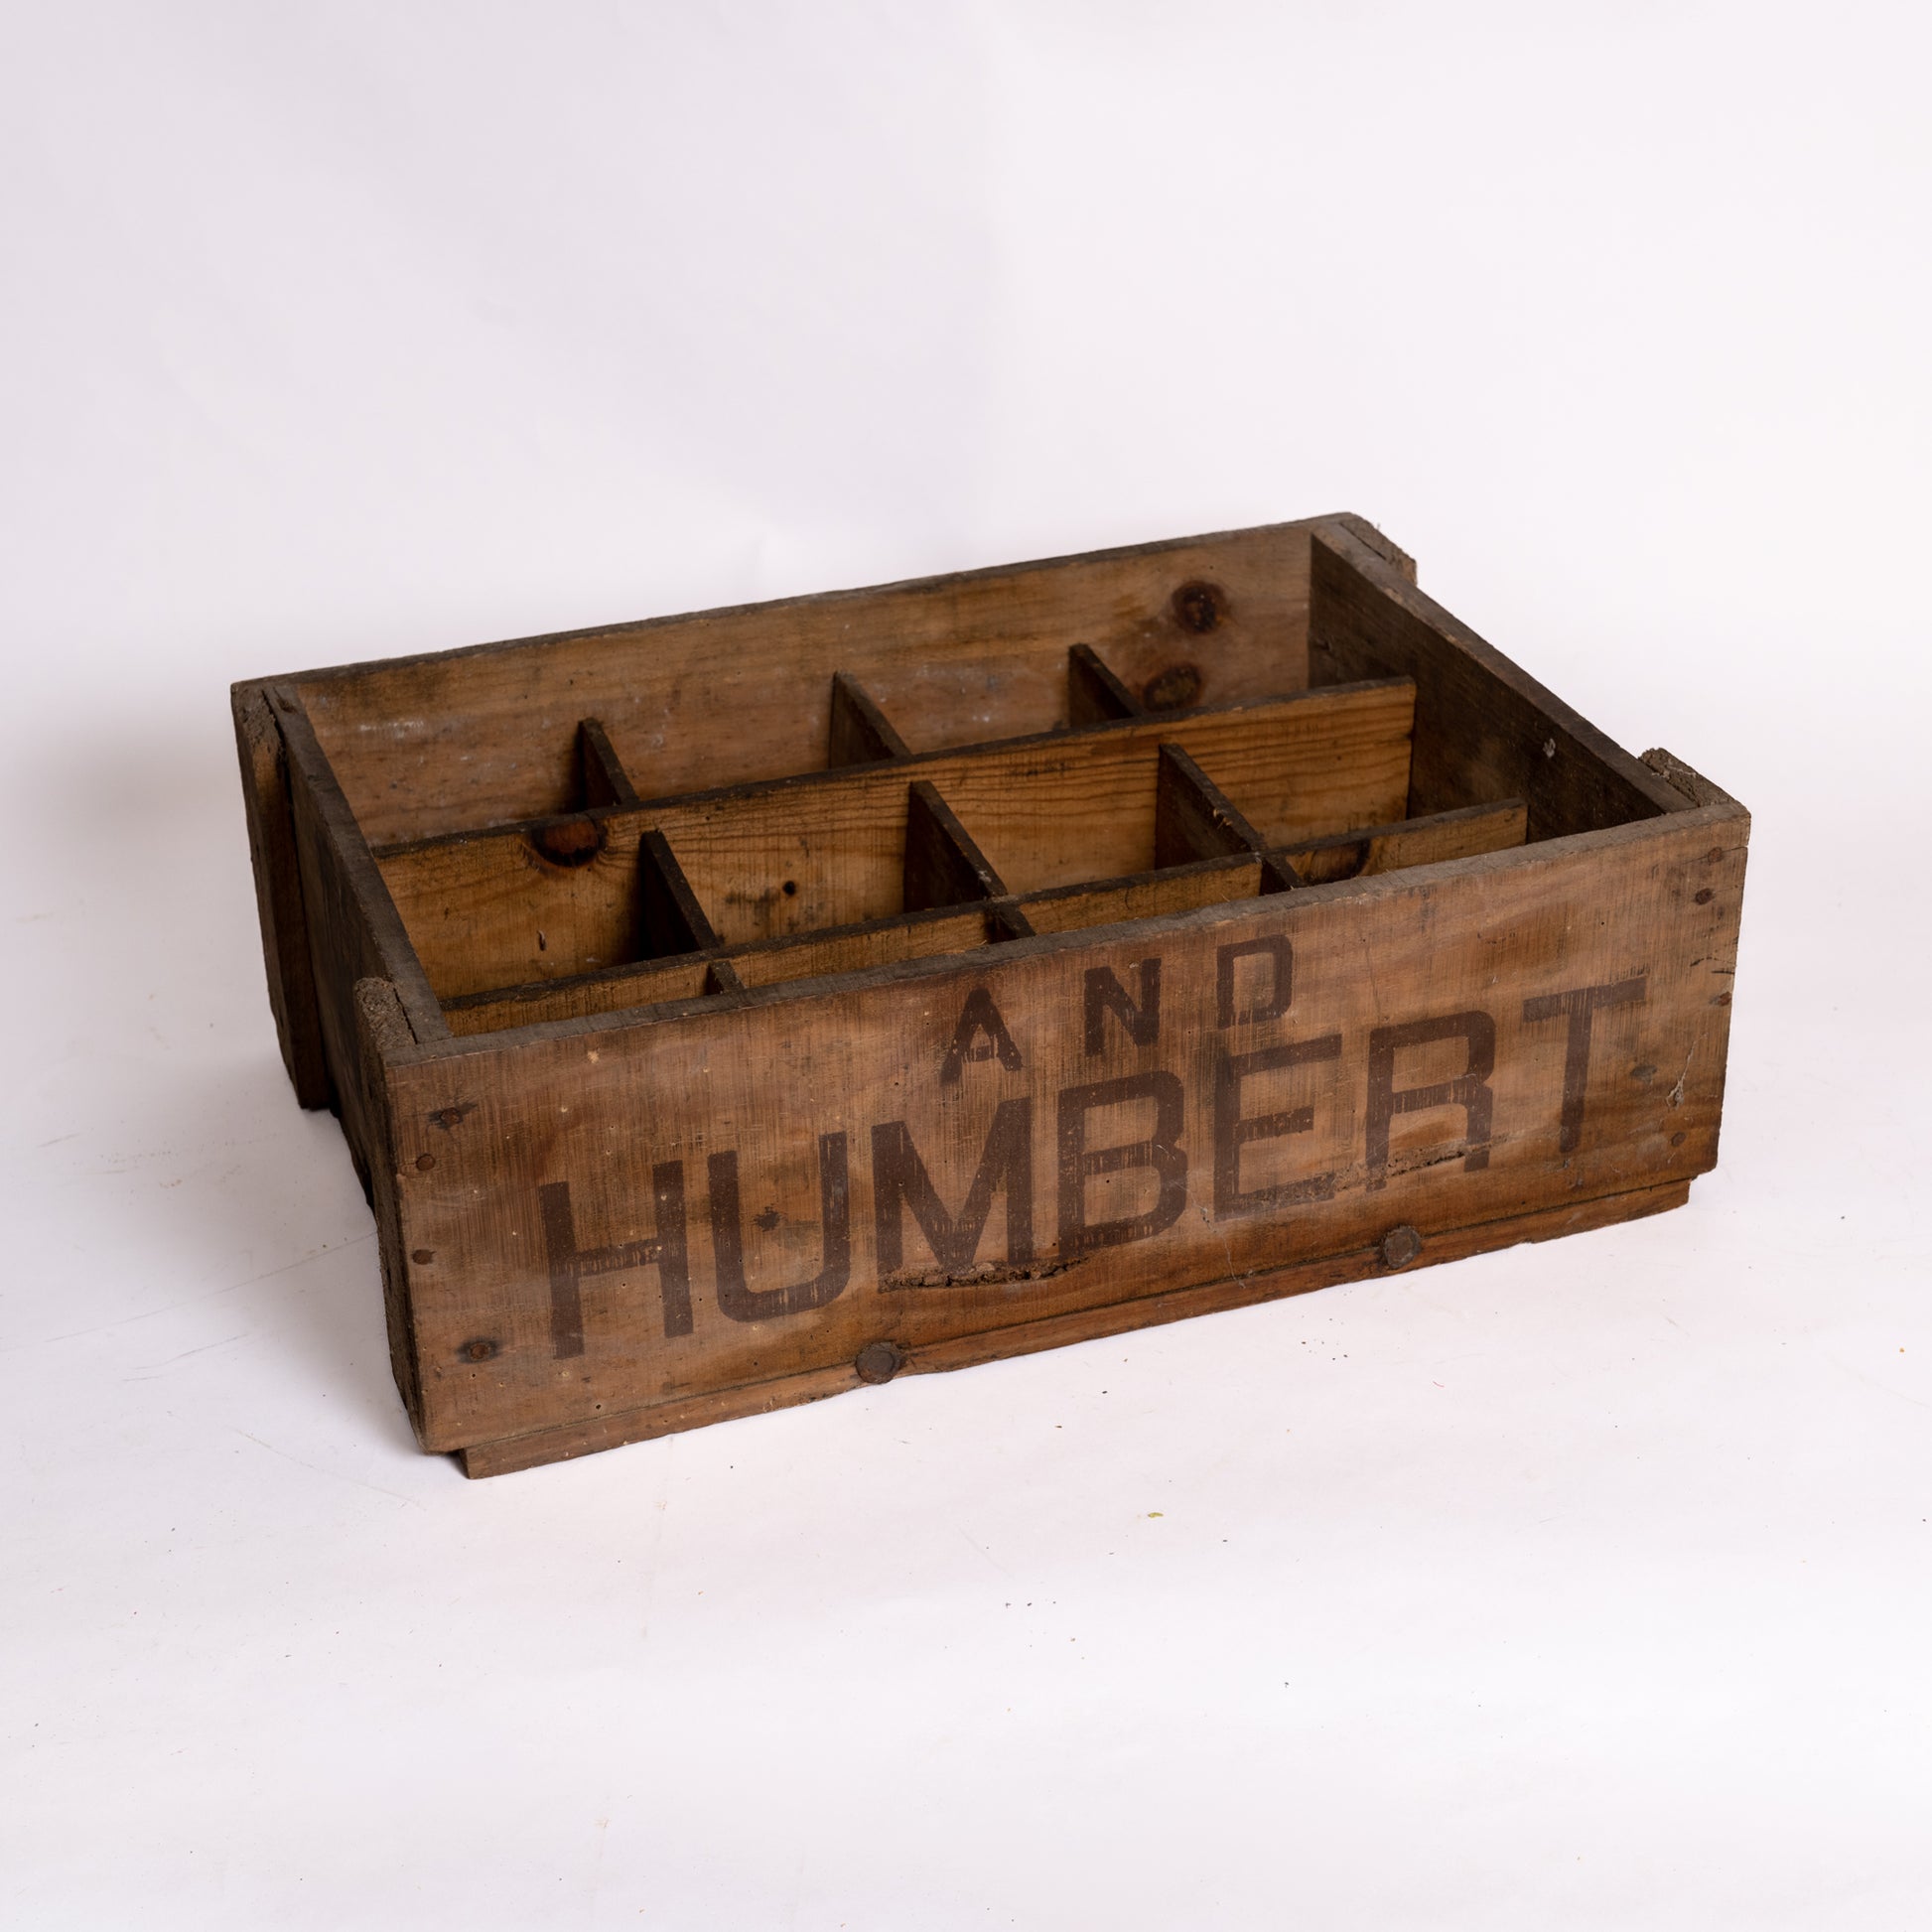 Williams and Herbert sherry crate